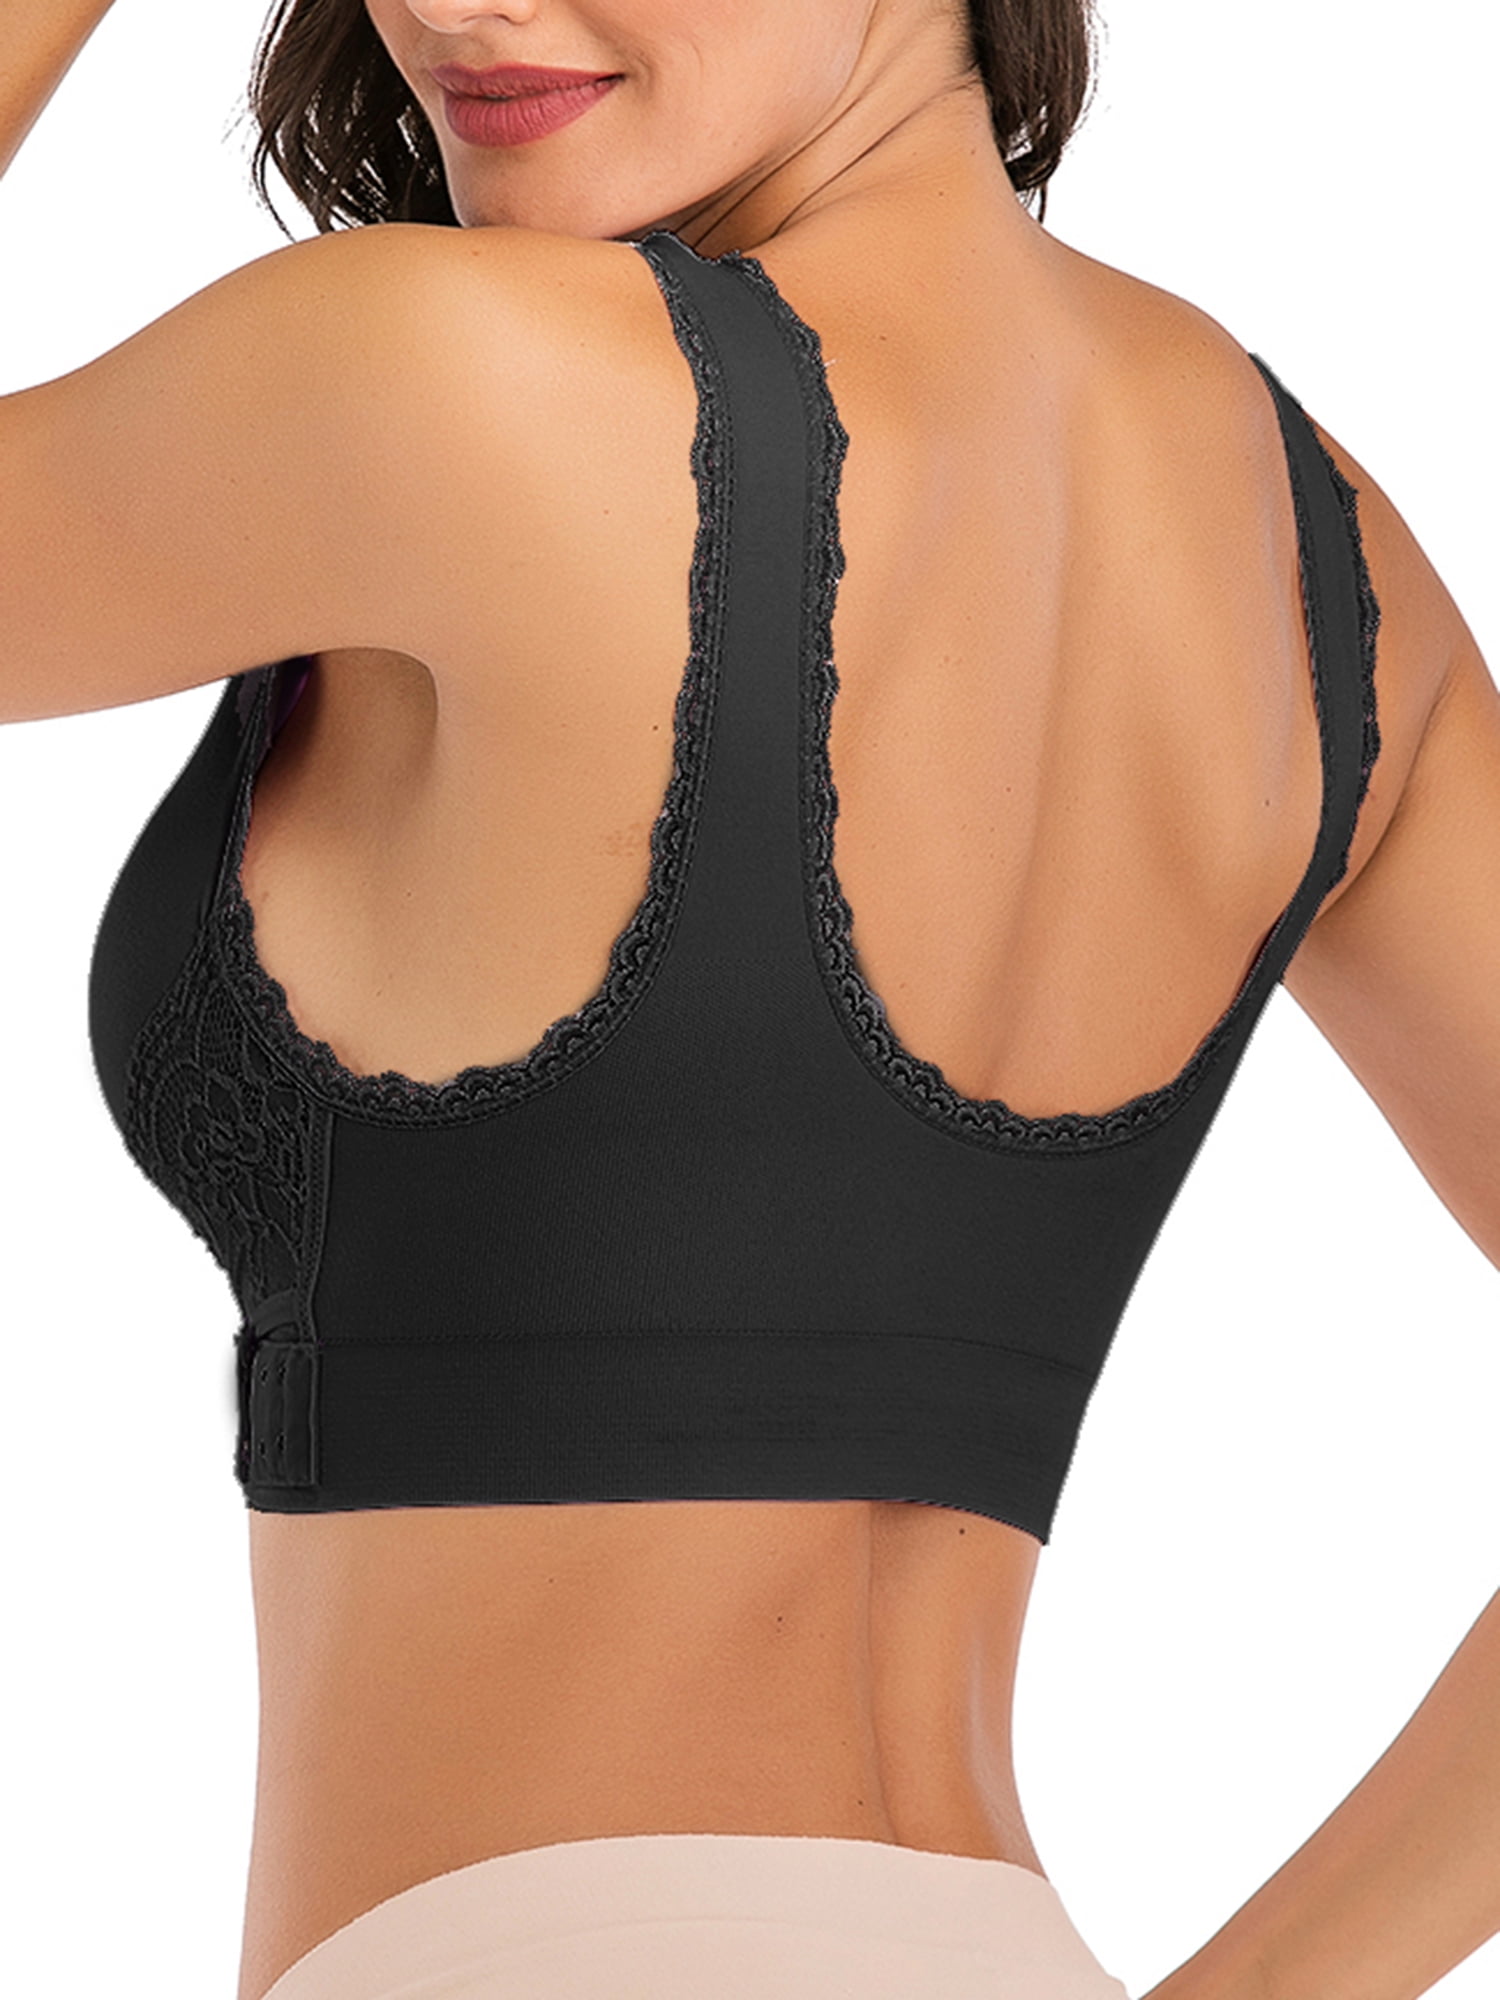 YouLoveIt Sports Bras for Women Lace Front Cross Side Buckle Wireless  Seamless Sports Bra Pullover Bra reathable Underwear Sport Bras for Workout